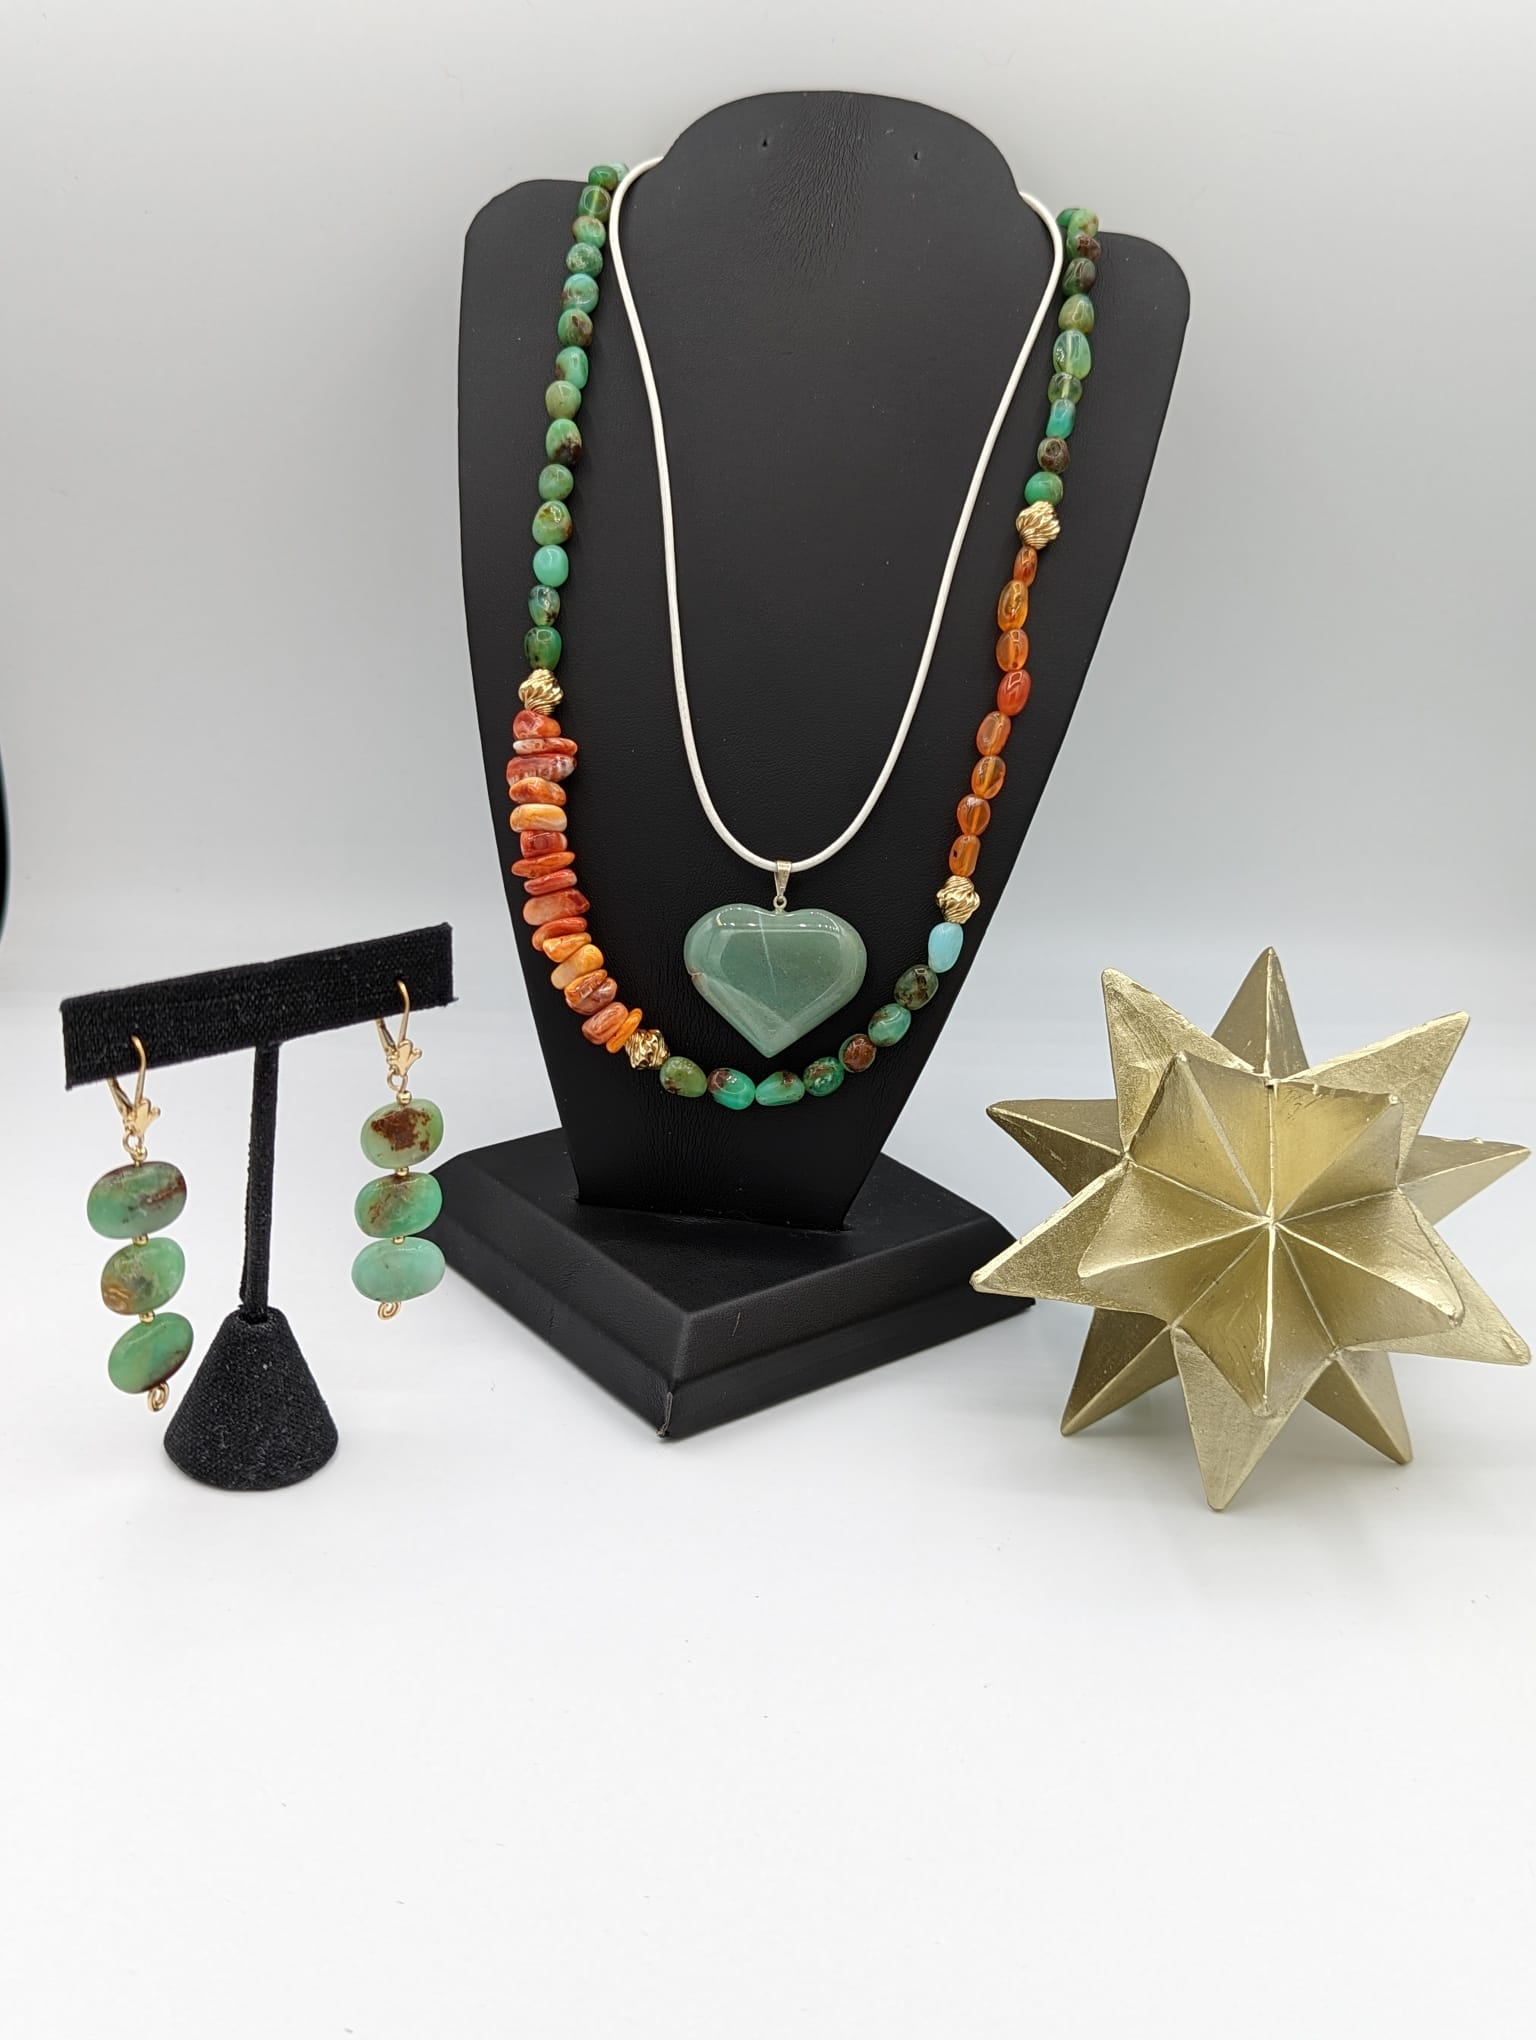 Unleash Your Inner Diva: The Irresistible Appeal of Artisan Handmade Jewelry